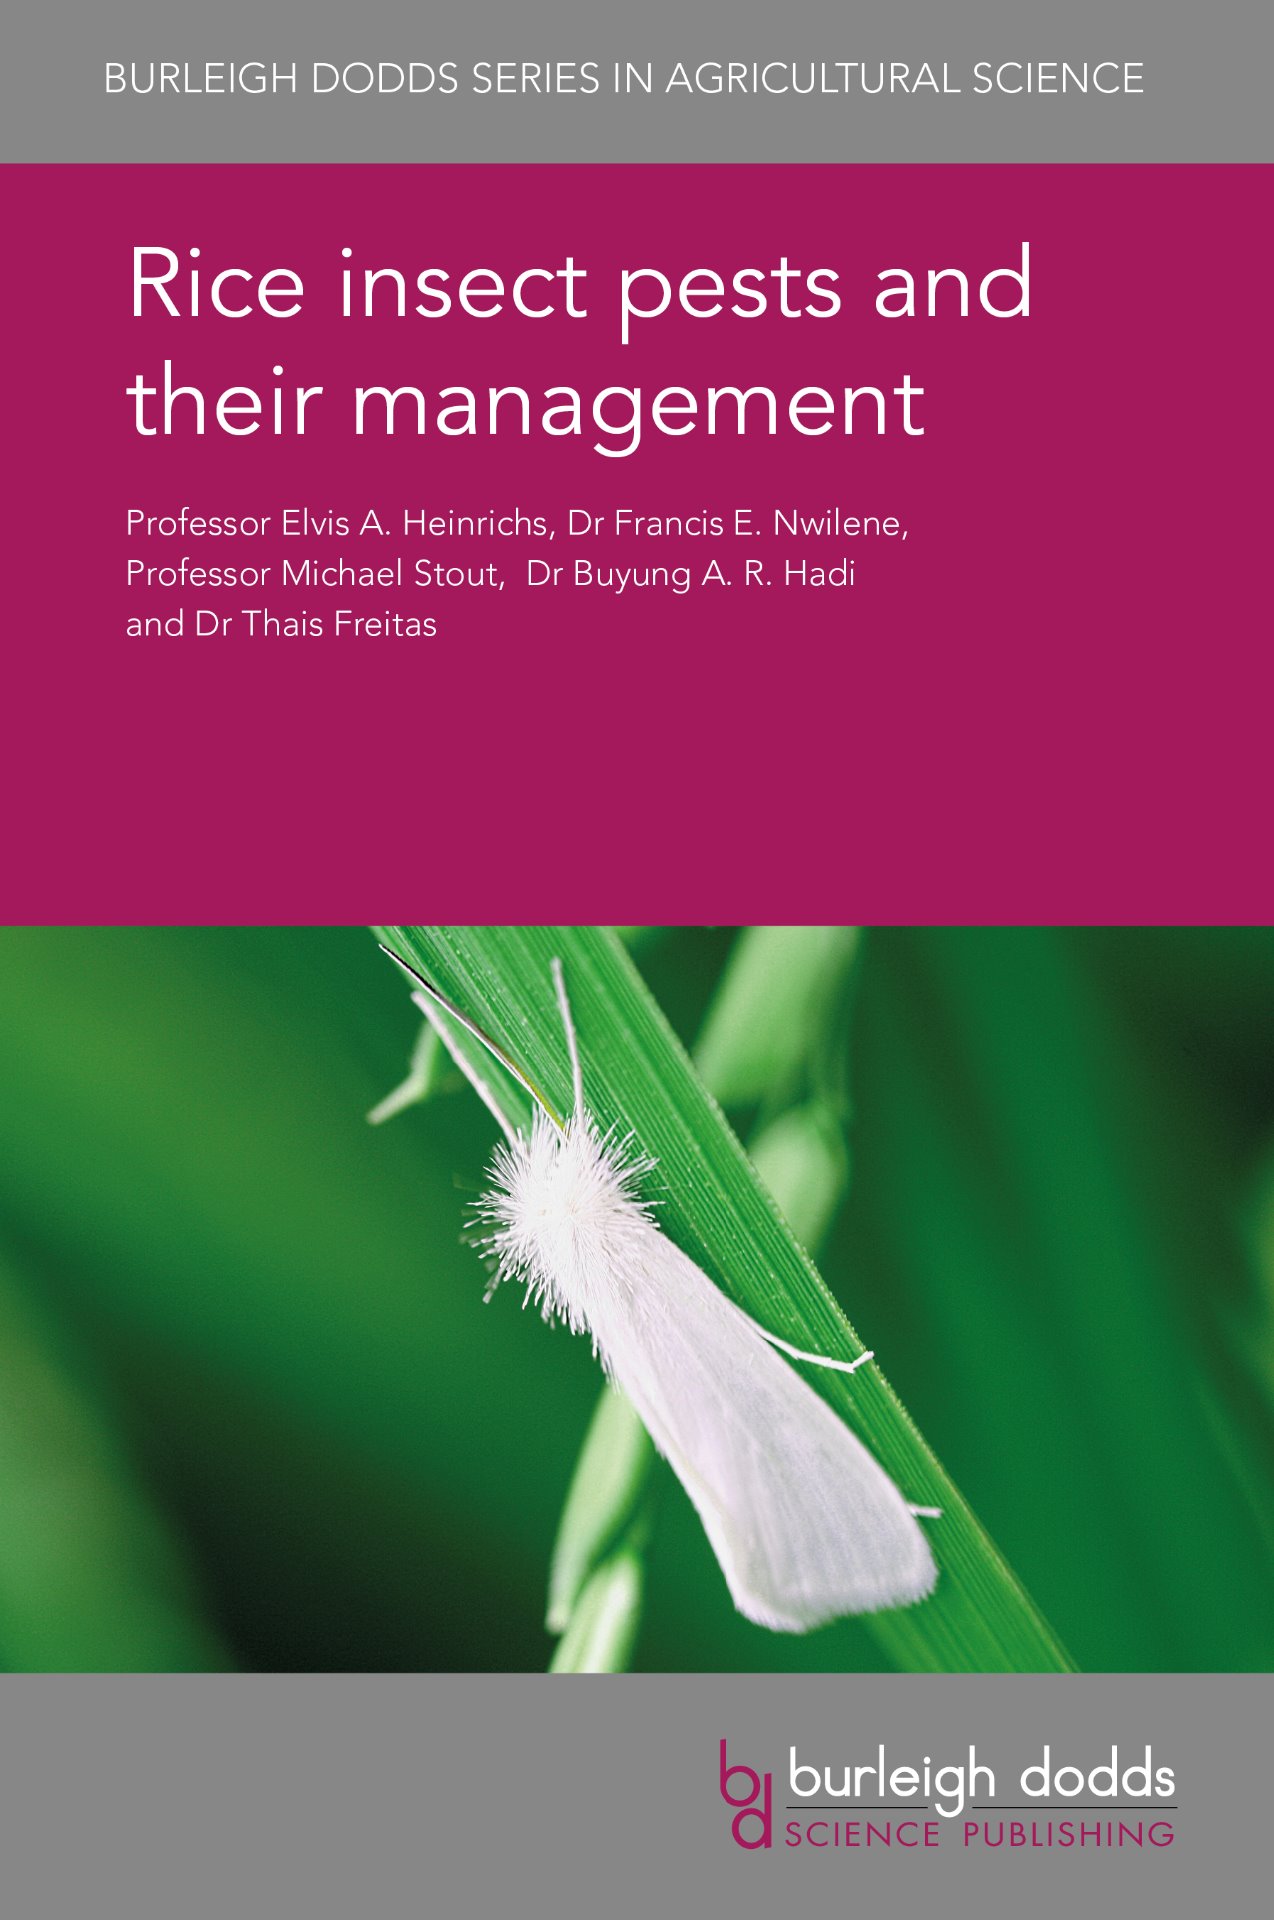 Rice insect pests and their management